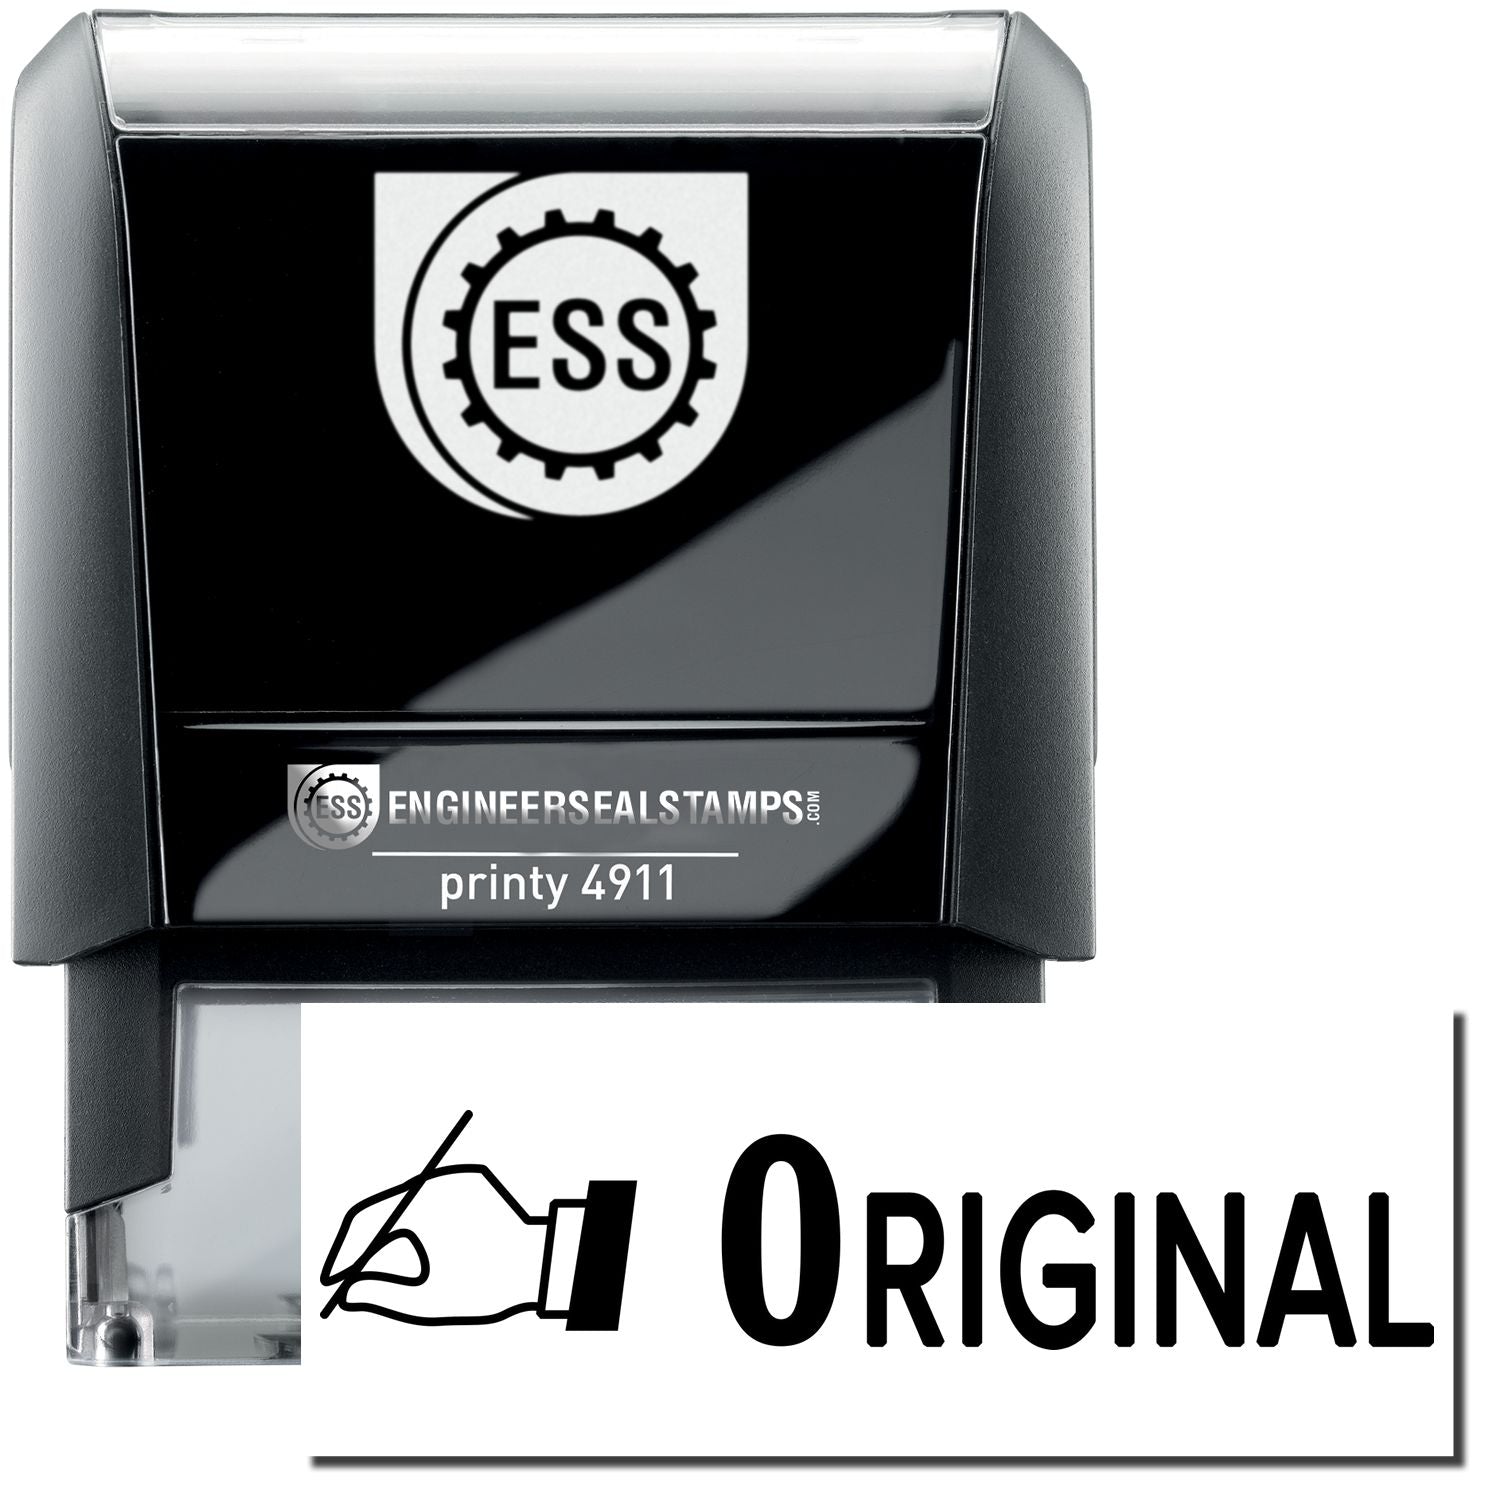 A self-inking stamp with a stamped image showing how the text "ORIGINAL" in a bold font and a small icon of a hand holding a pen on the left is displayed after stamping.